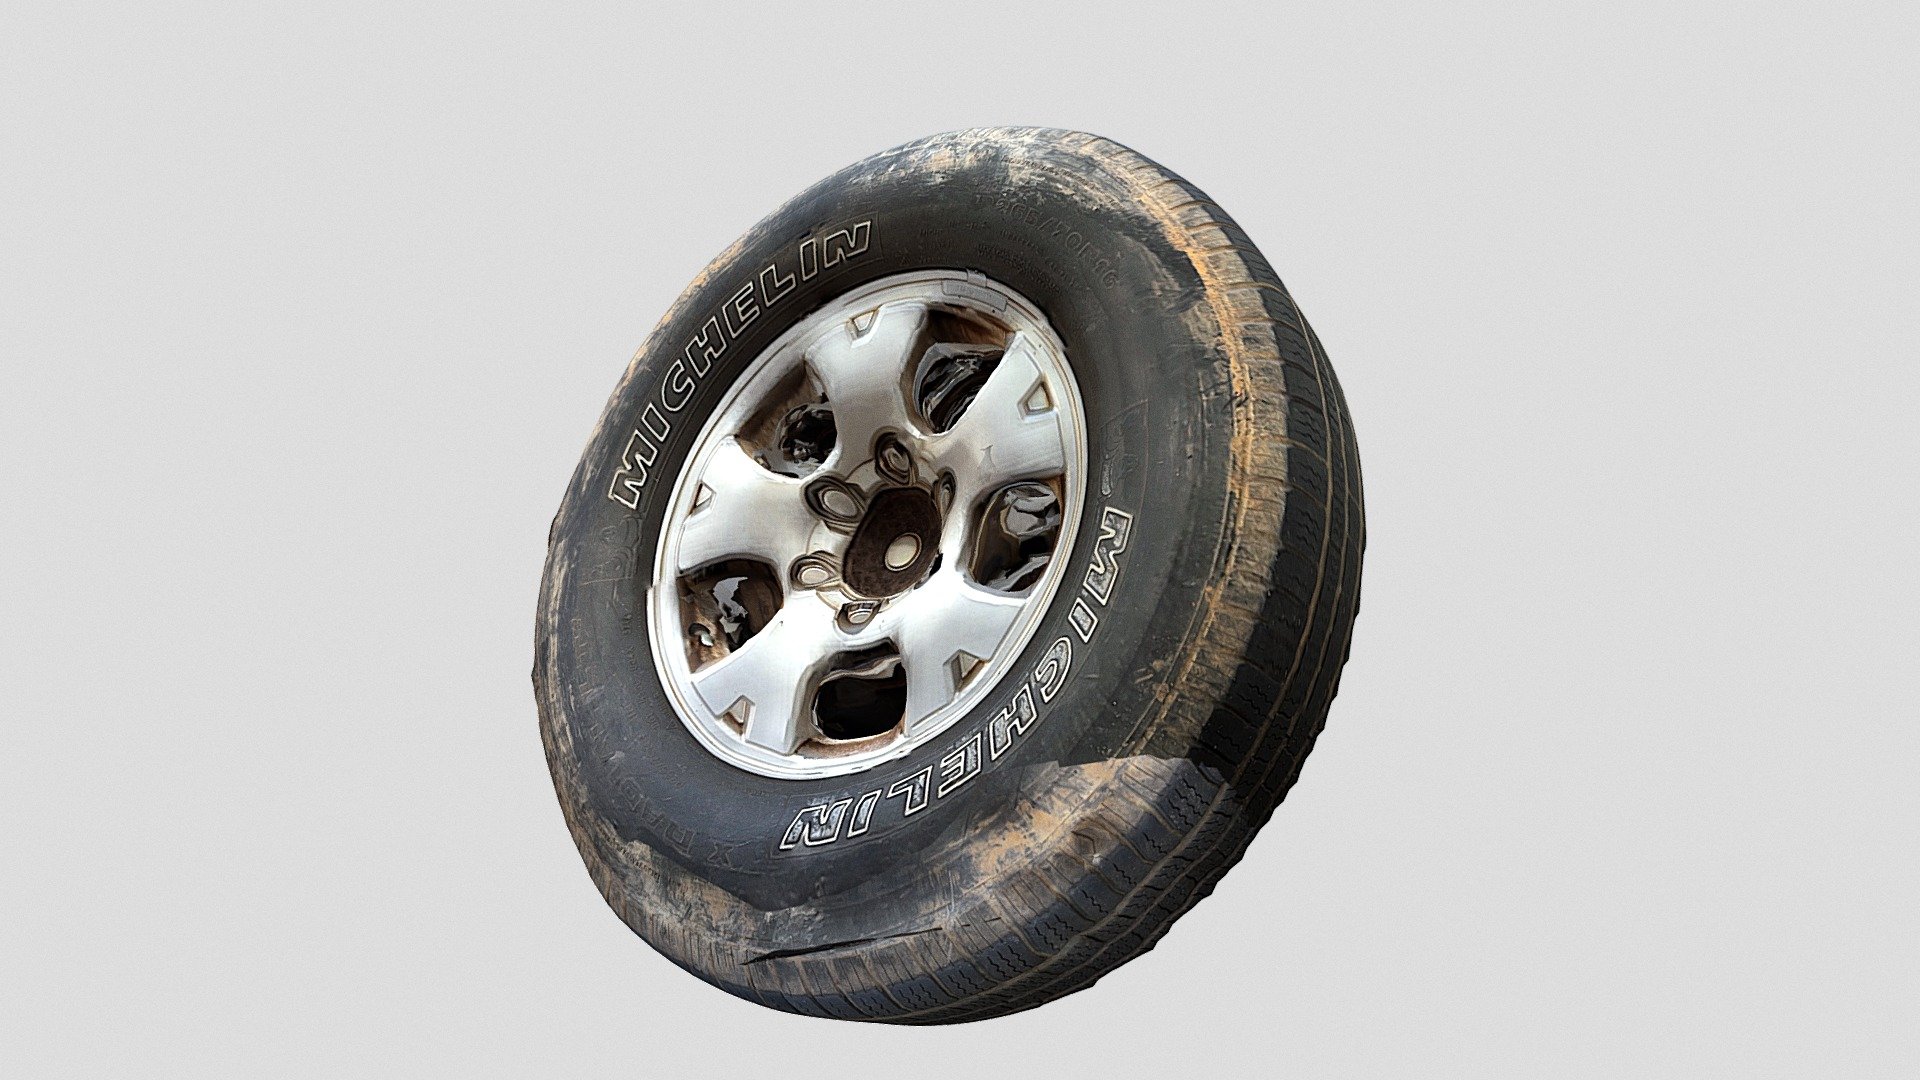 A 3d model of a worn out tacoma Truck tire from Michelin 3d model